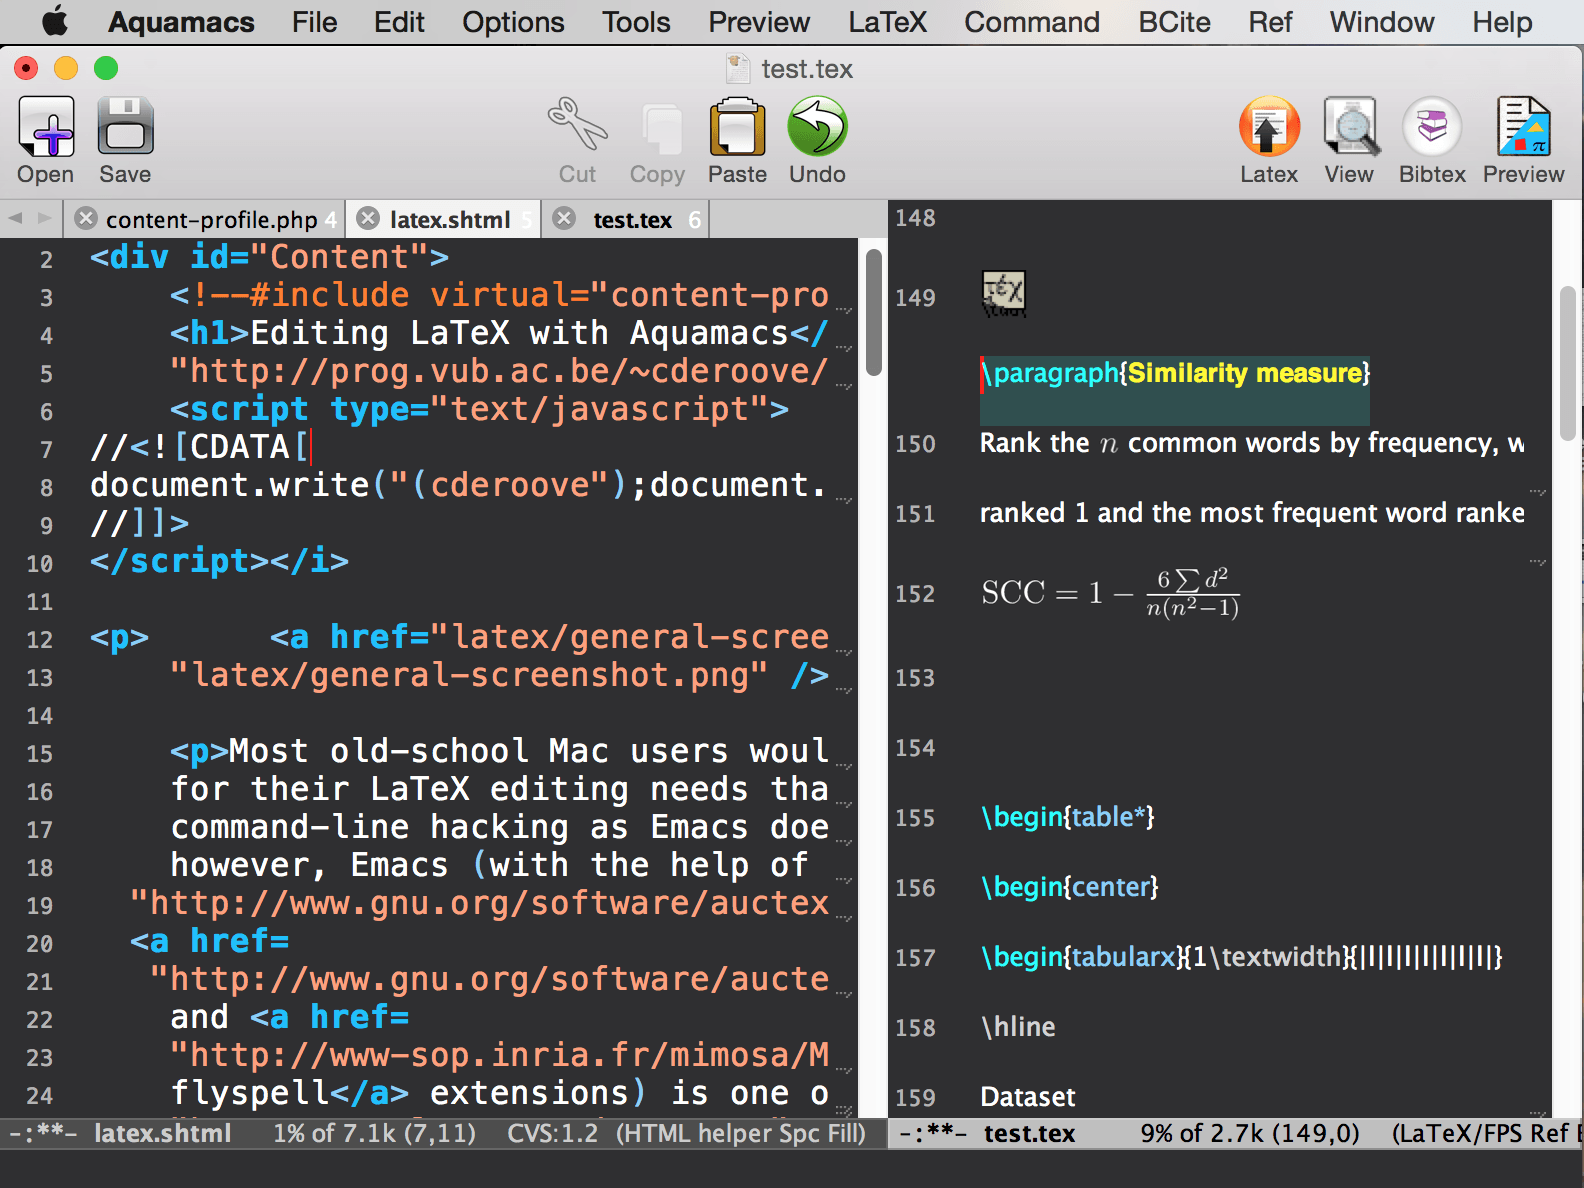 AquamacsEmacs editor with full LaTeX support for macOS